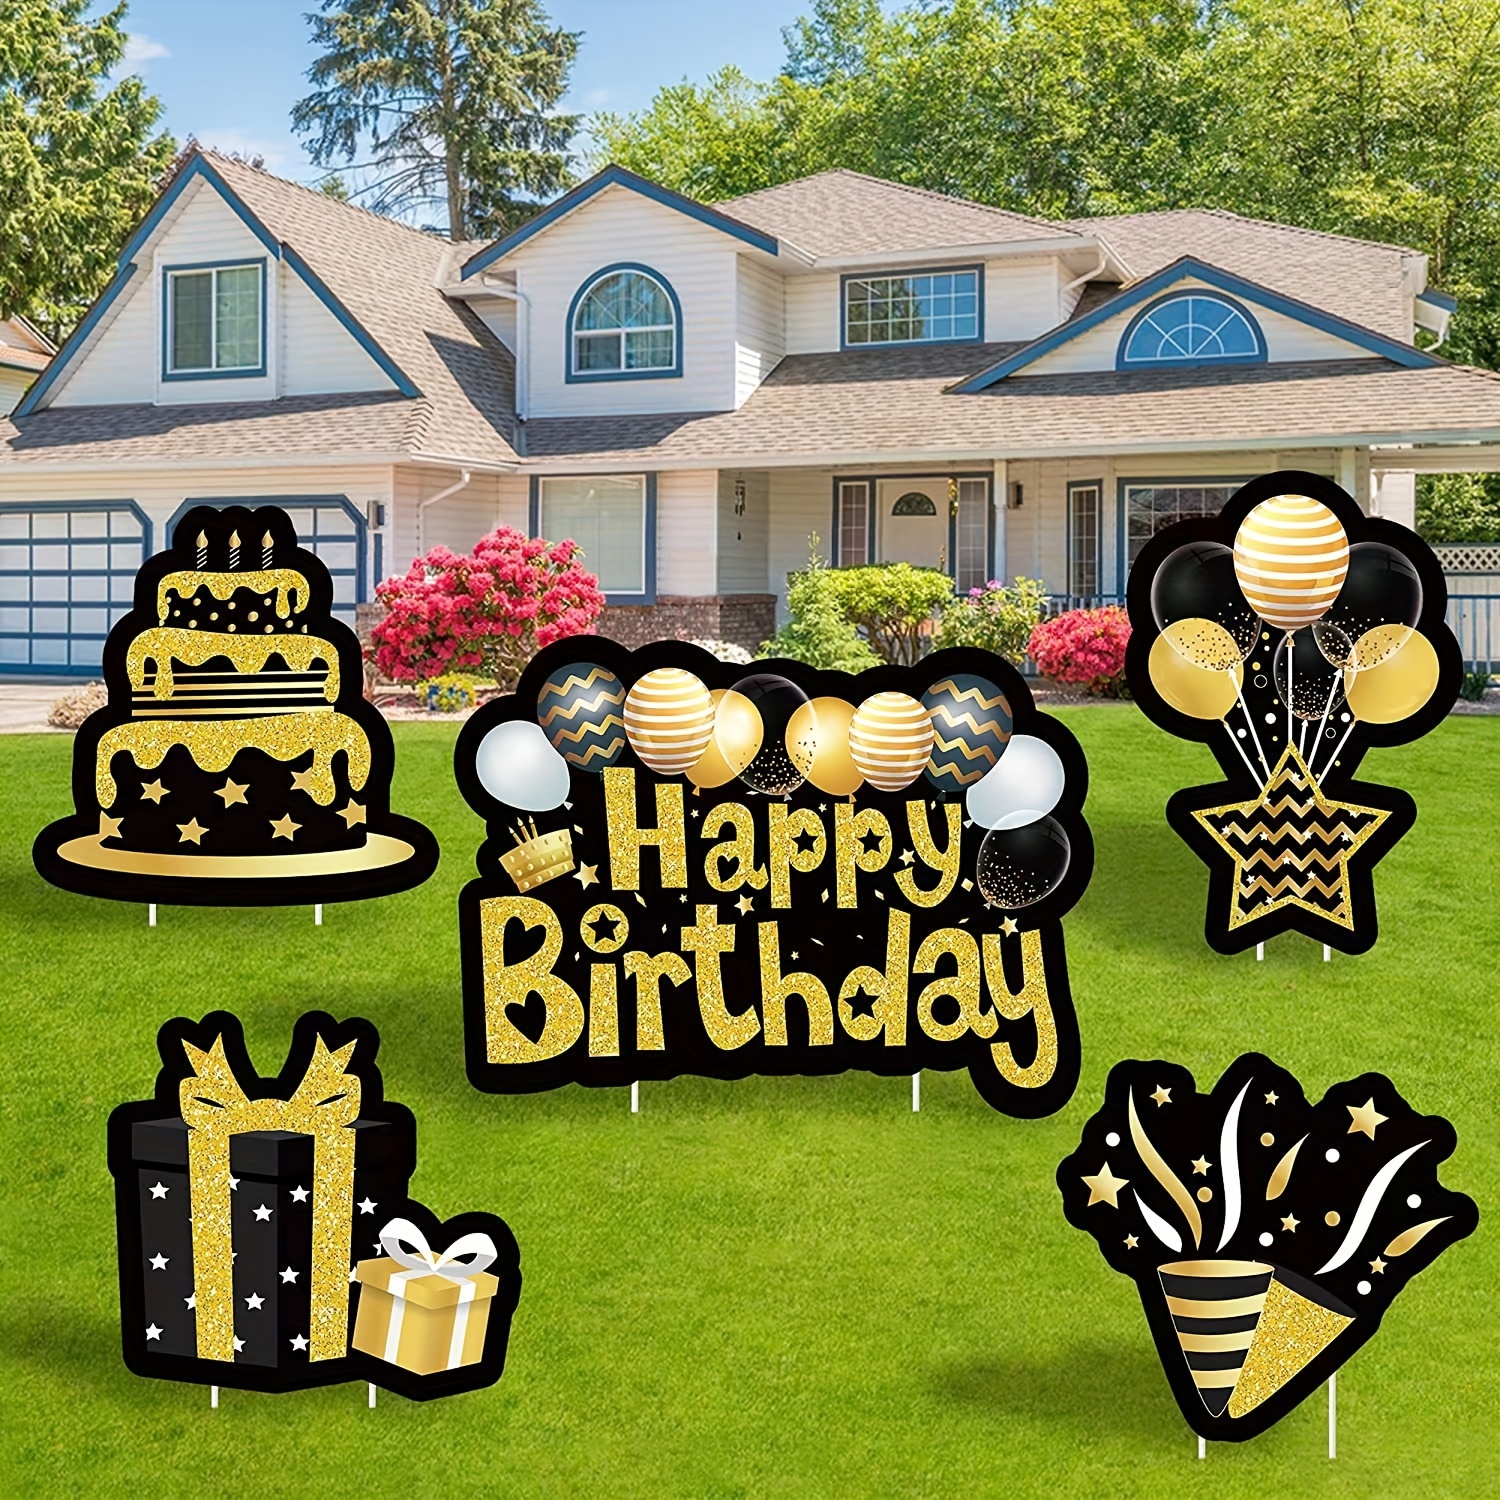 

Set Of 5 Happy Birthday Yard Signs With Stakes, Black Waterproof Lawn Golden Sign, Glittery Balloons Cake Gift Box Ribbons Birthday Party Supplies, Outdoor Garden Decorations, Photo Props